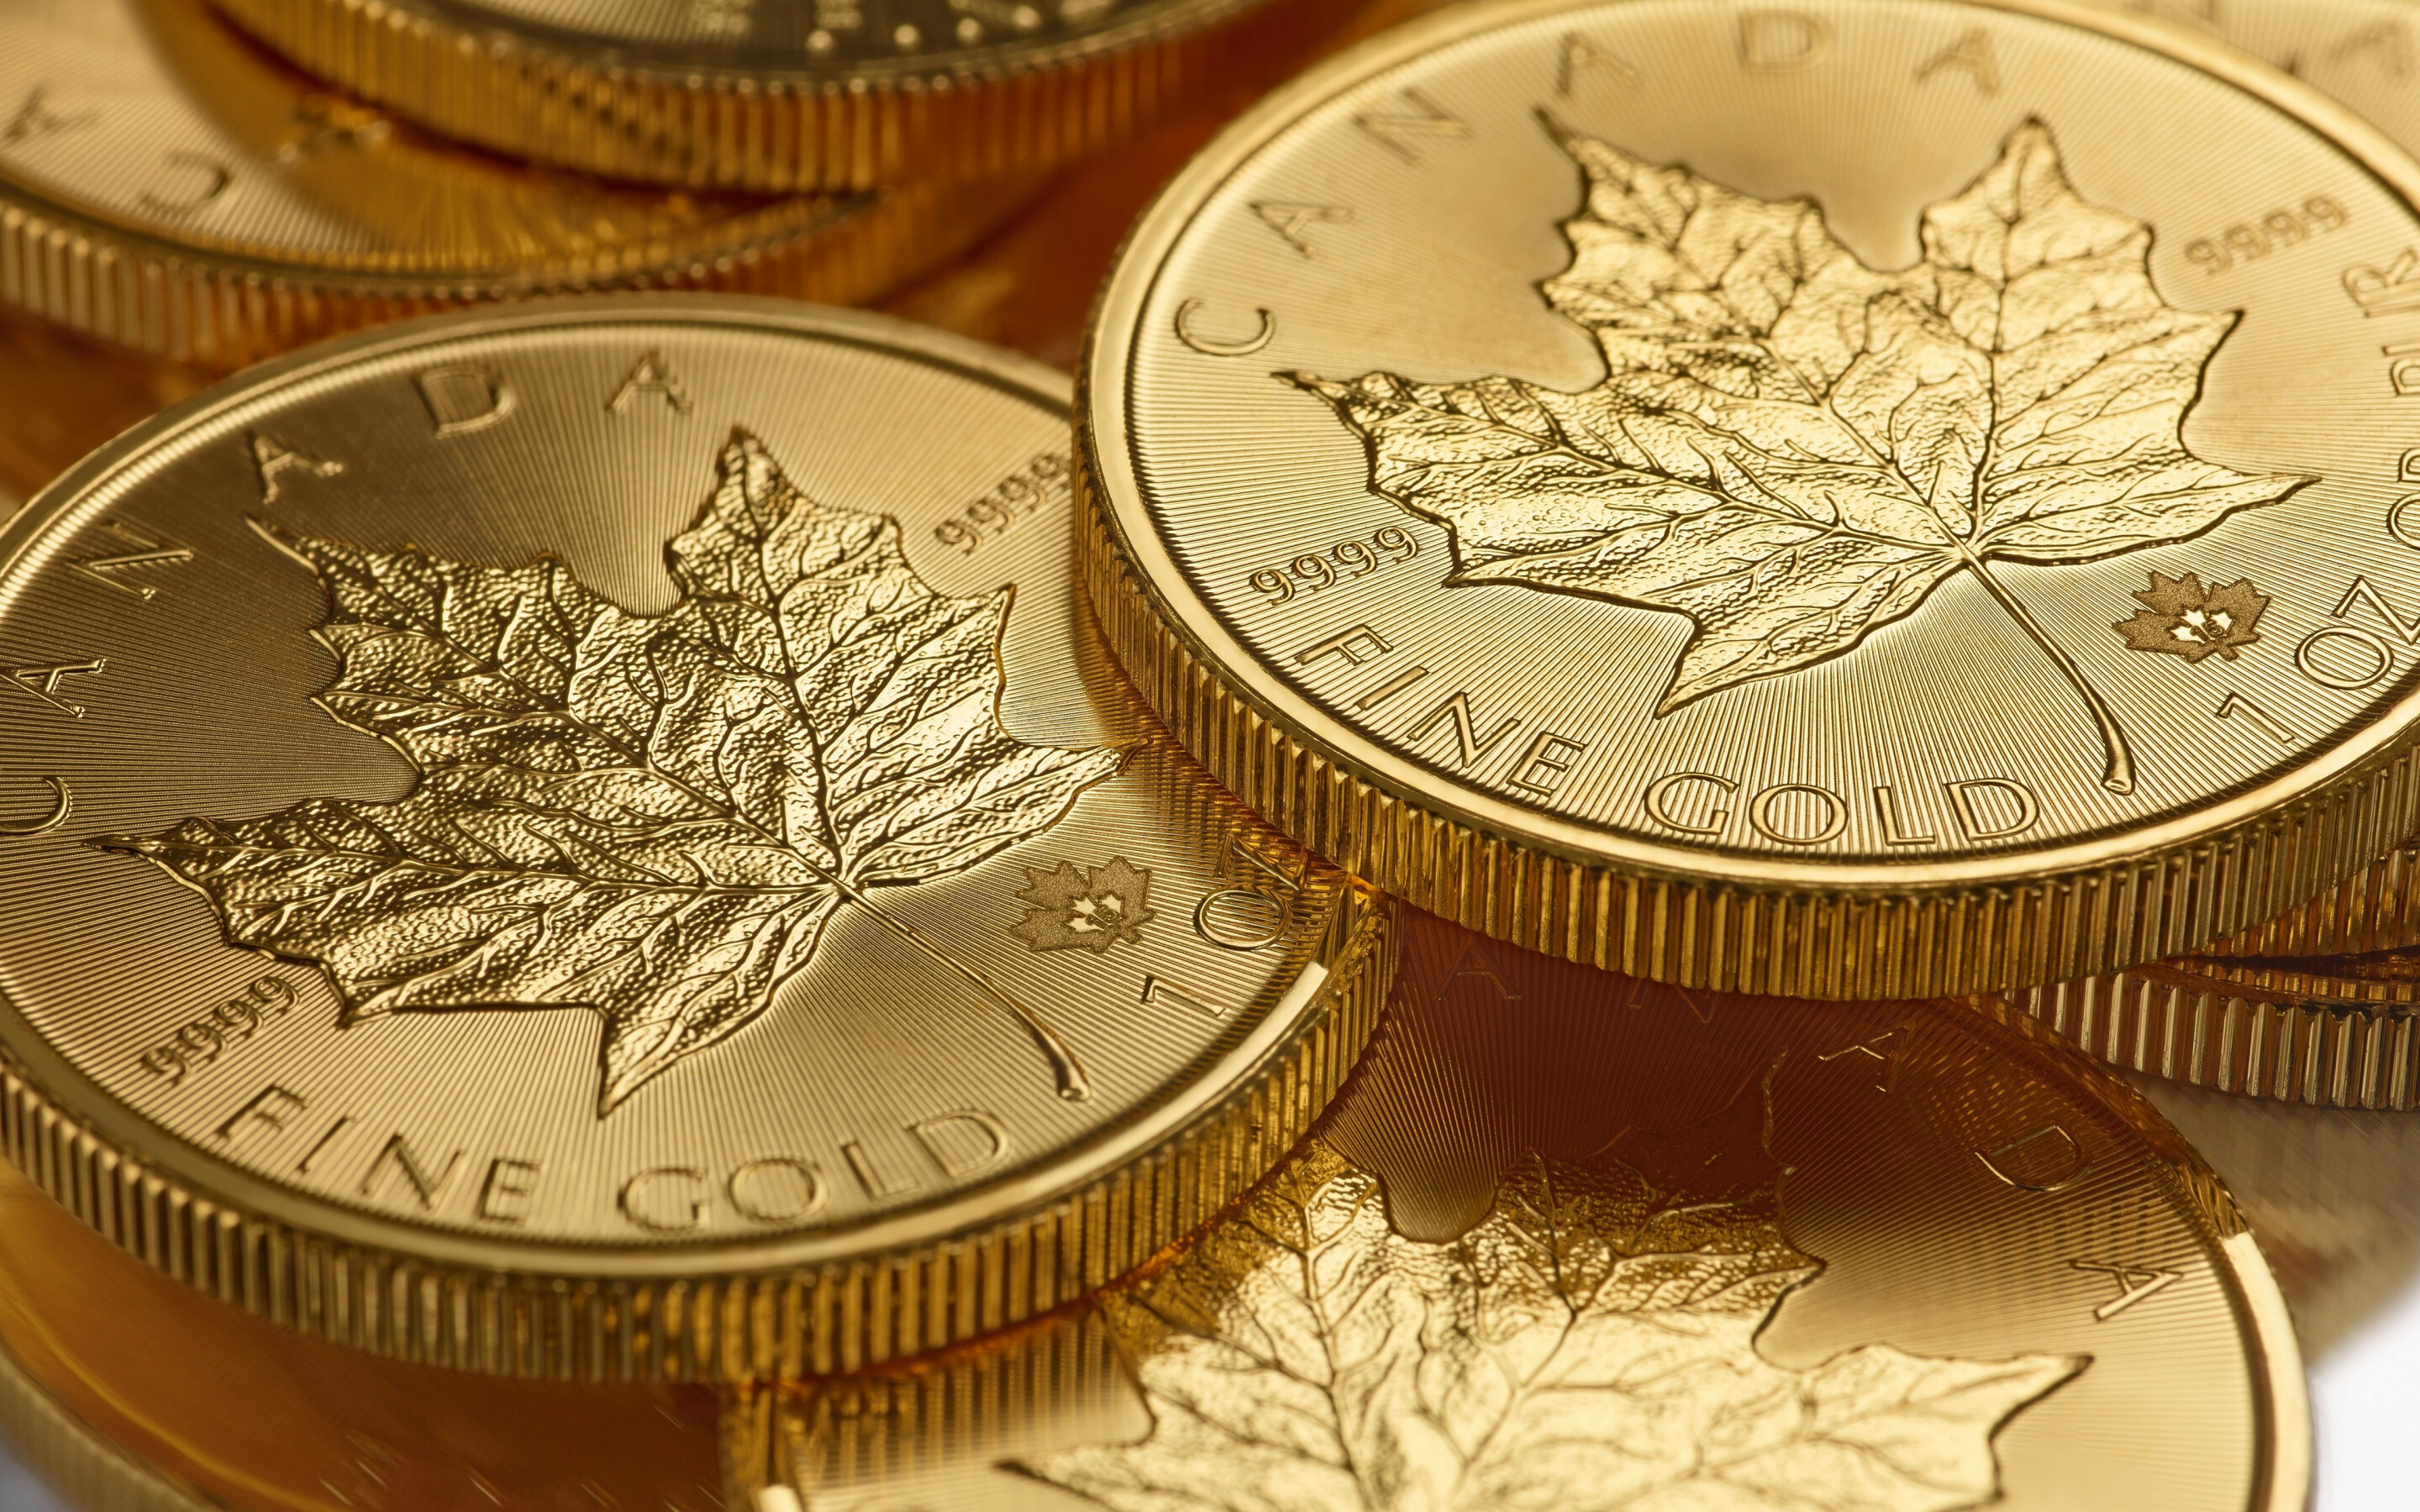 Gold Coins: Canadian Gold Maple Leaf, 9999 millesimal fineness, 24 carats coin, Royal Canadian Mint. 2880x1800 HD Wallpaper.